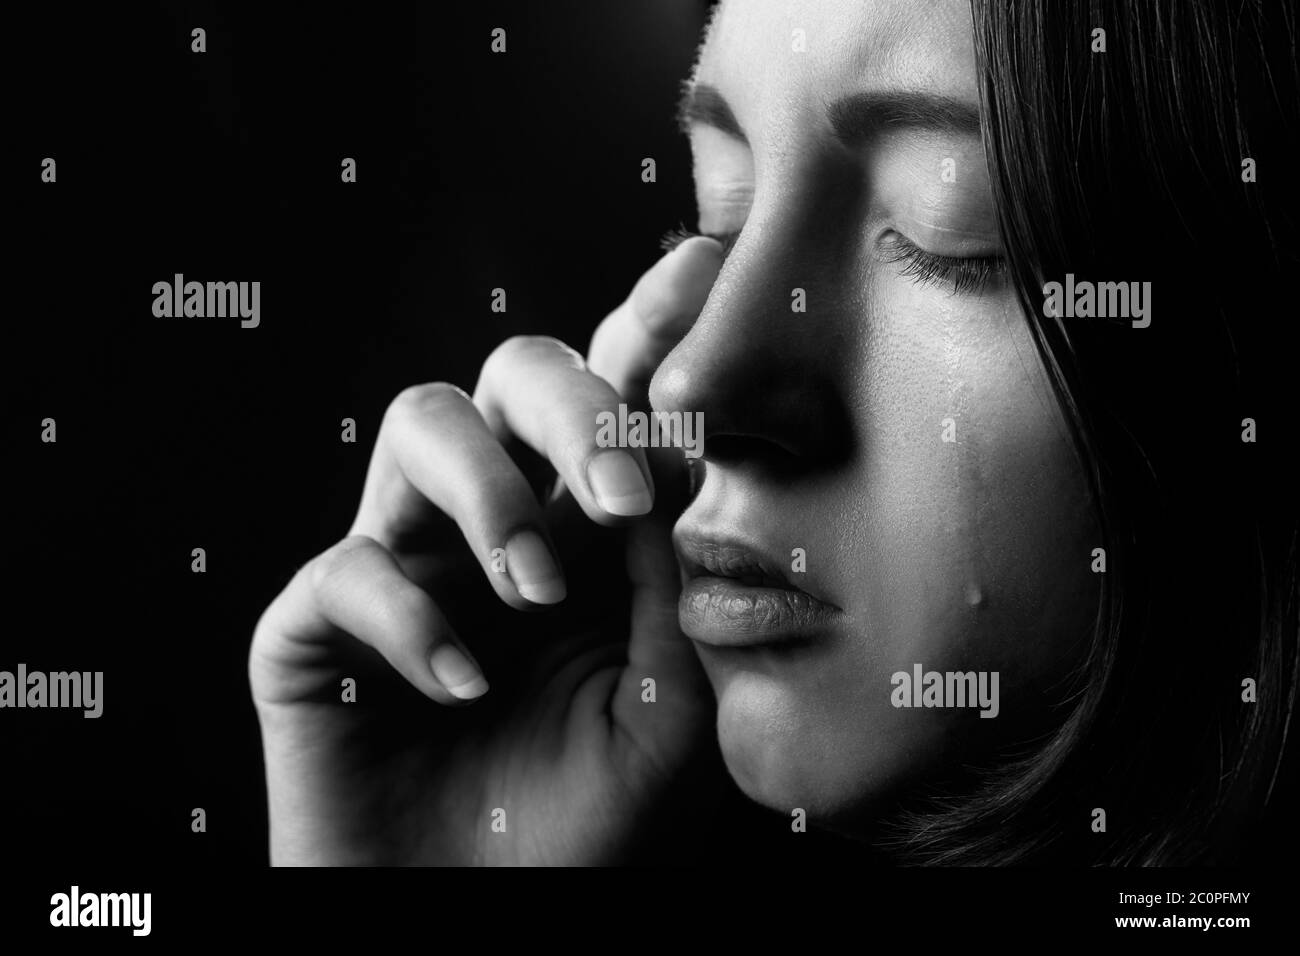 sad woman with closed eyes crying, on black background, closeup portrait, side view, monochrome Stock Photo